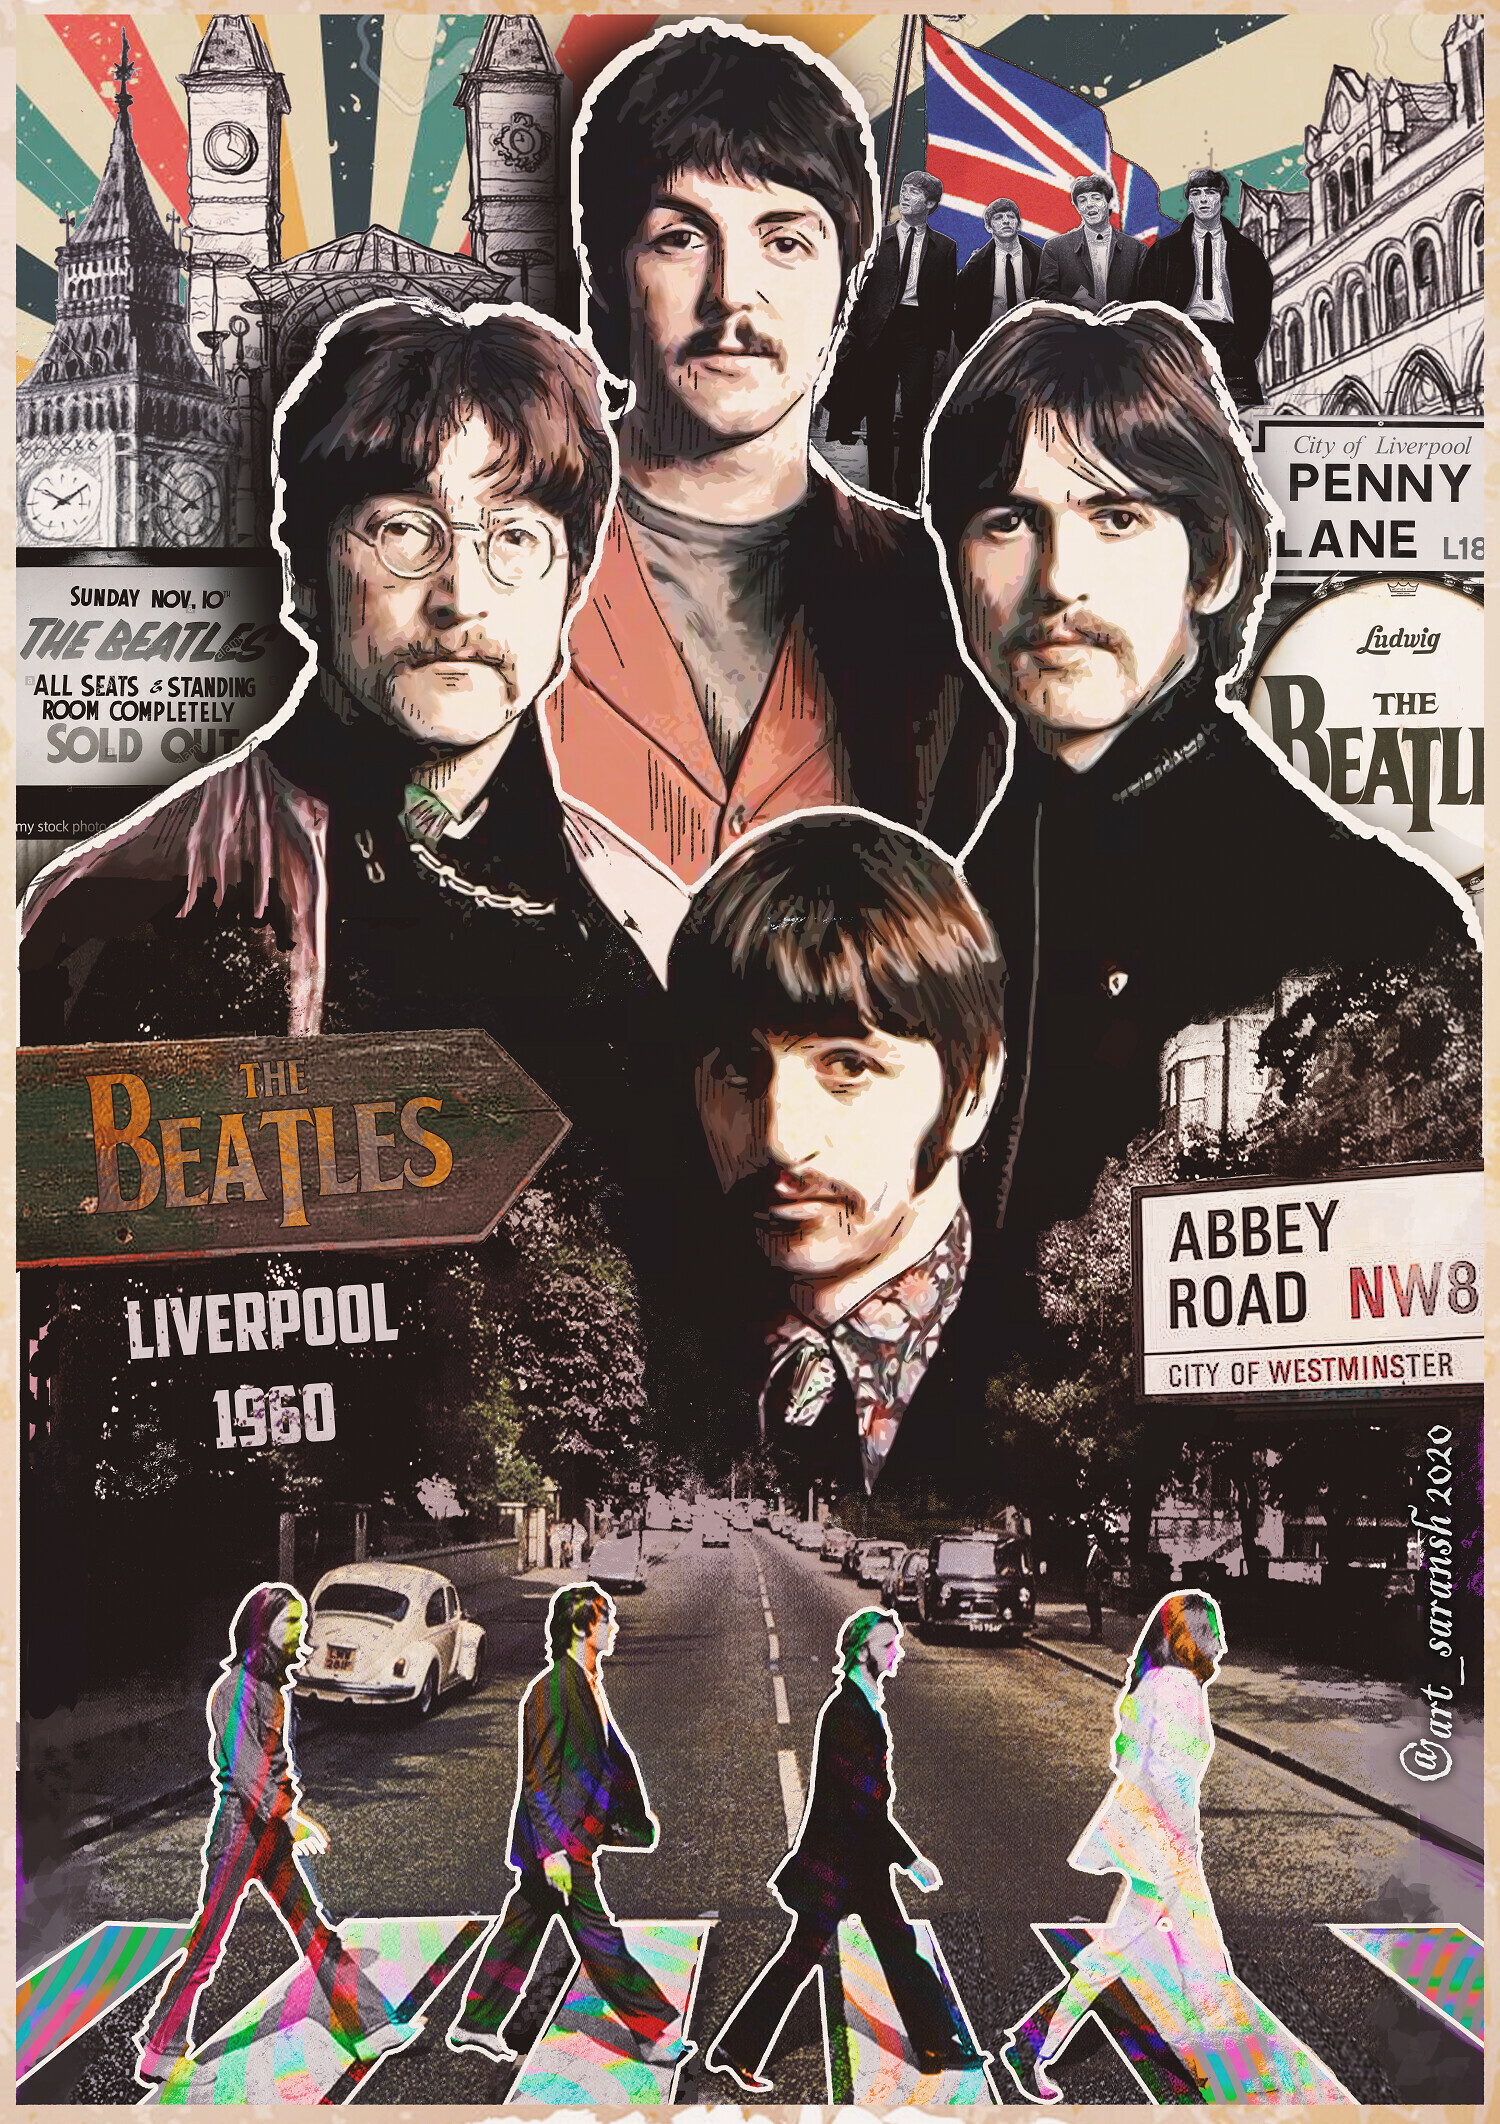 The Beatles: Abbey Road, Liverpool 1960, Penny Lane, Rock band. 1500x2130 HD Background.